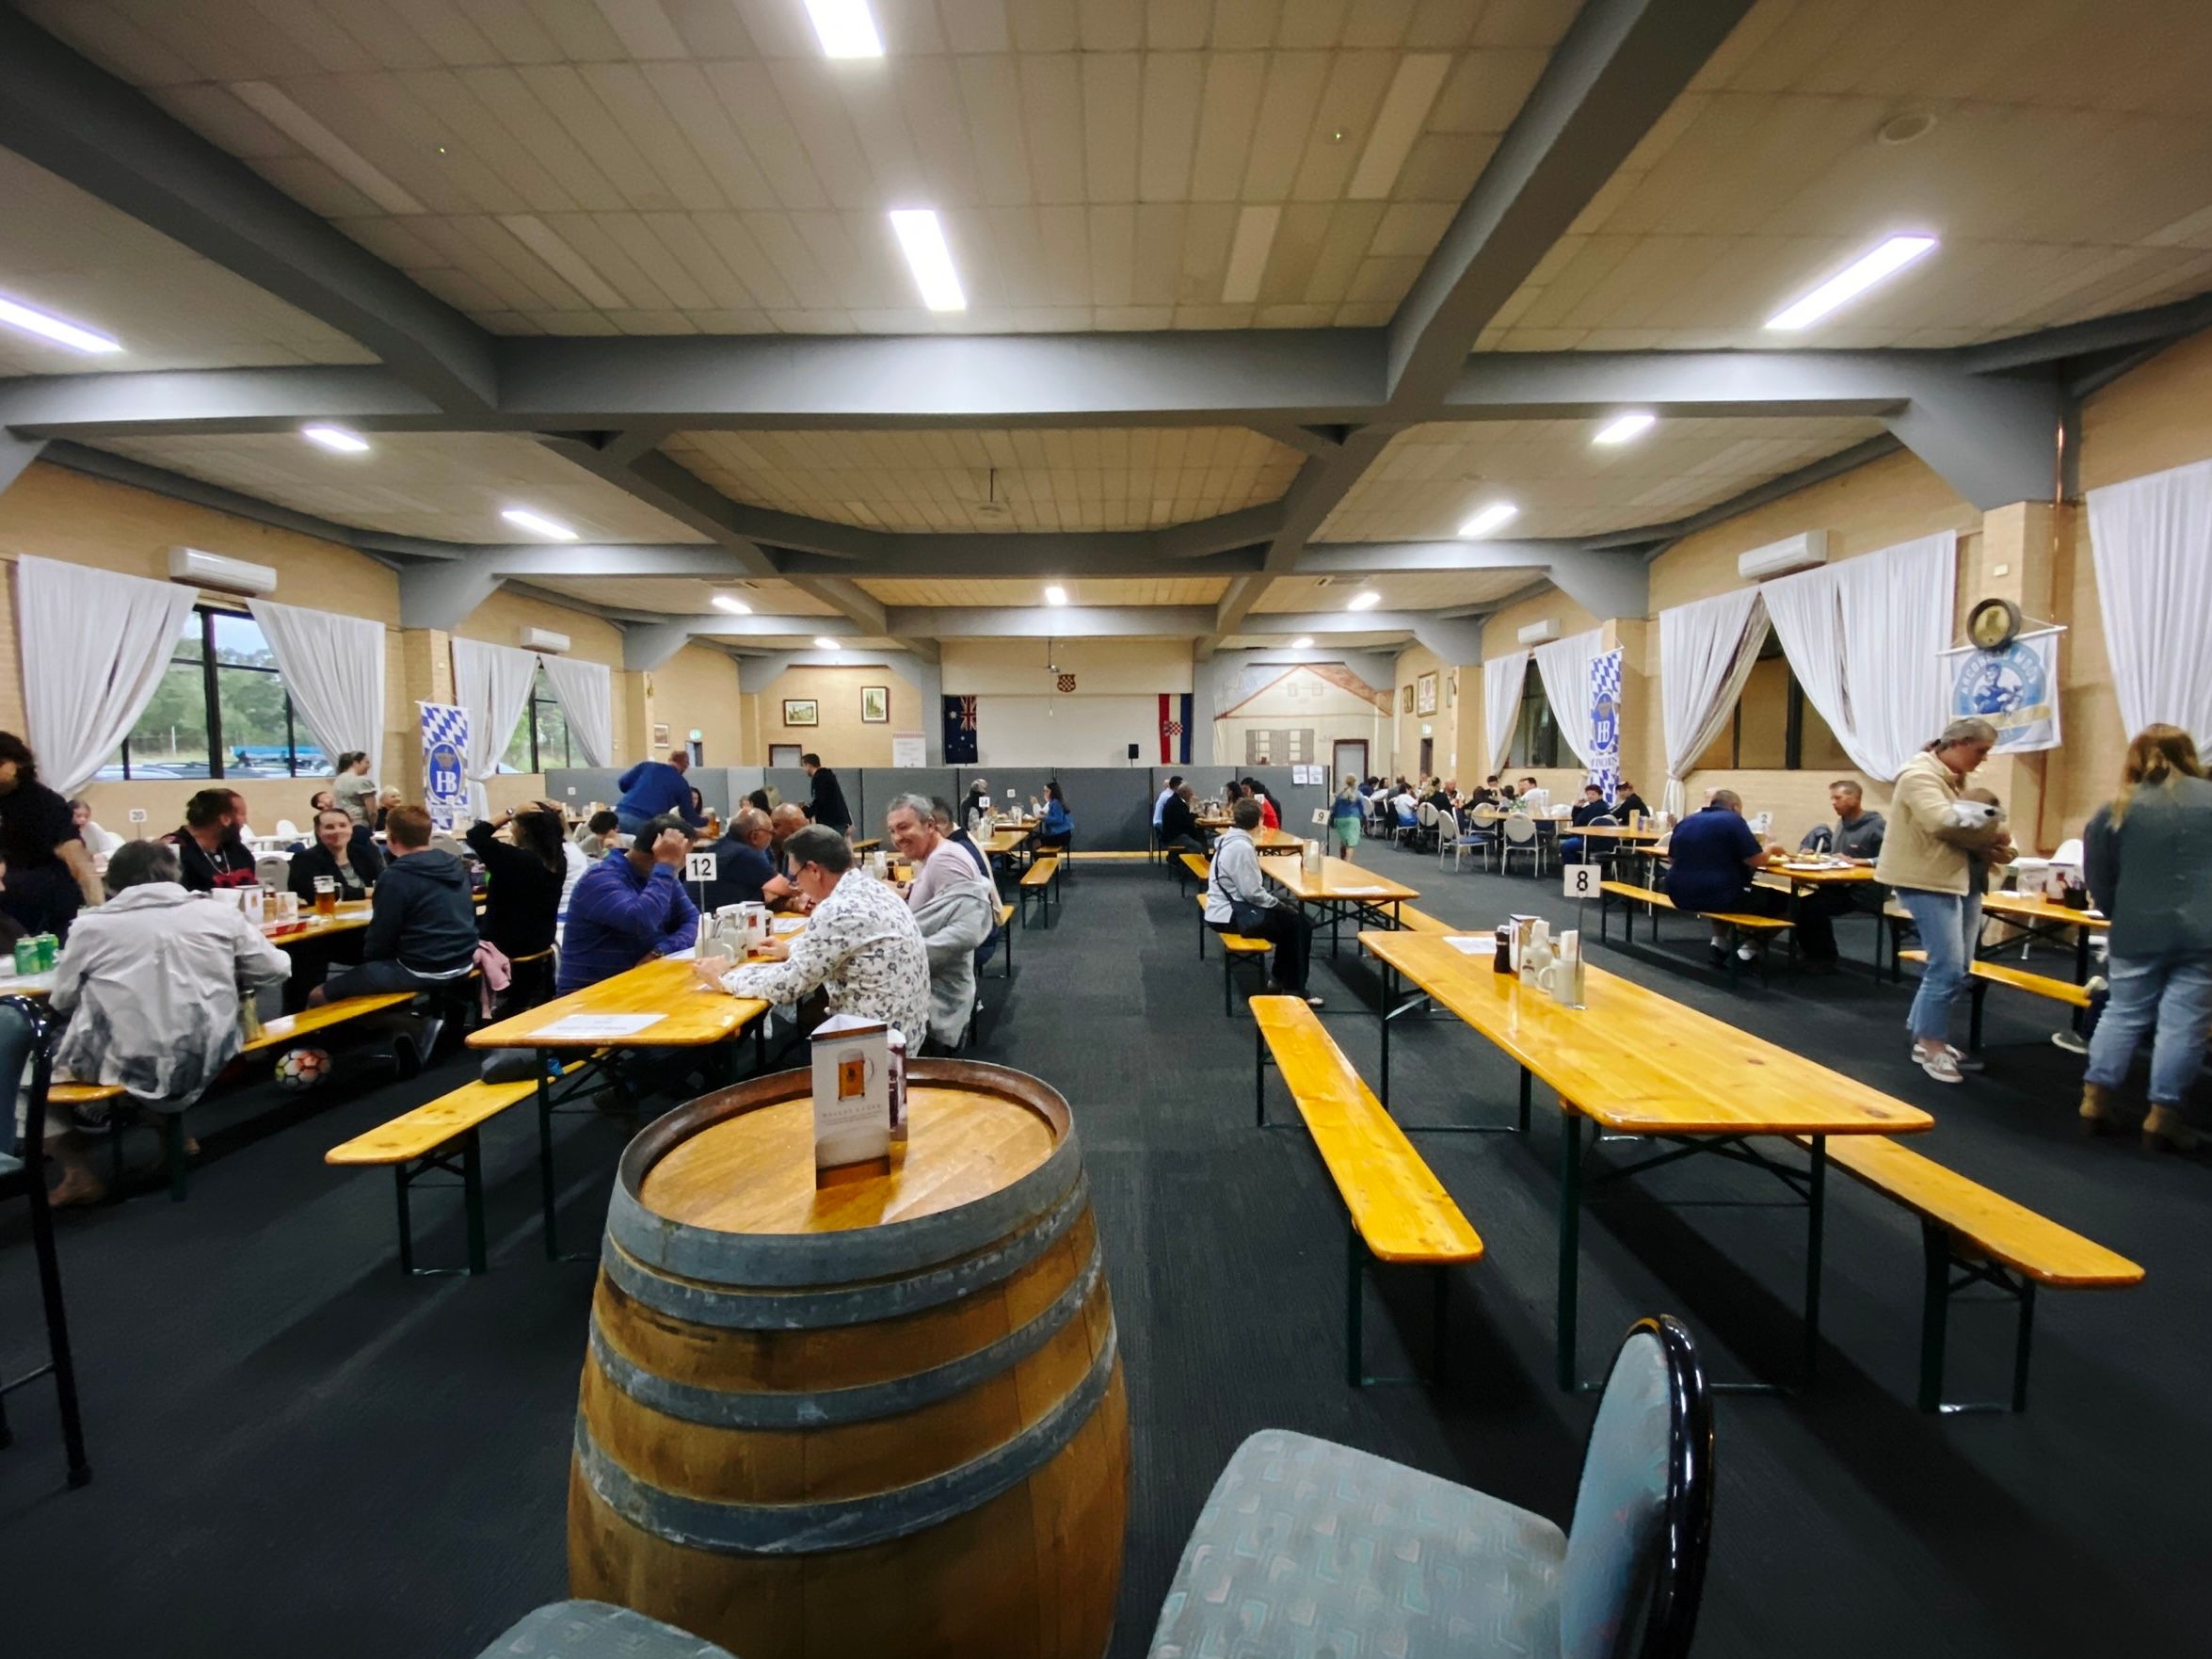 A wide-angle photo of the inside of a big community hall with blue-grey carpet and a bunch a wooden-topped trestle tables, with plenty of people sitting at them.